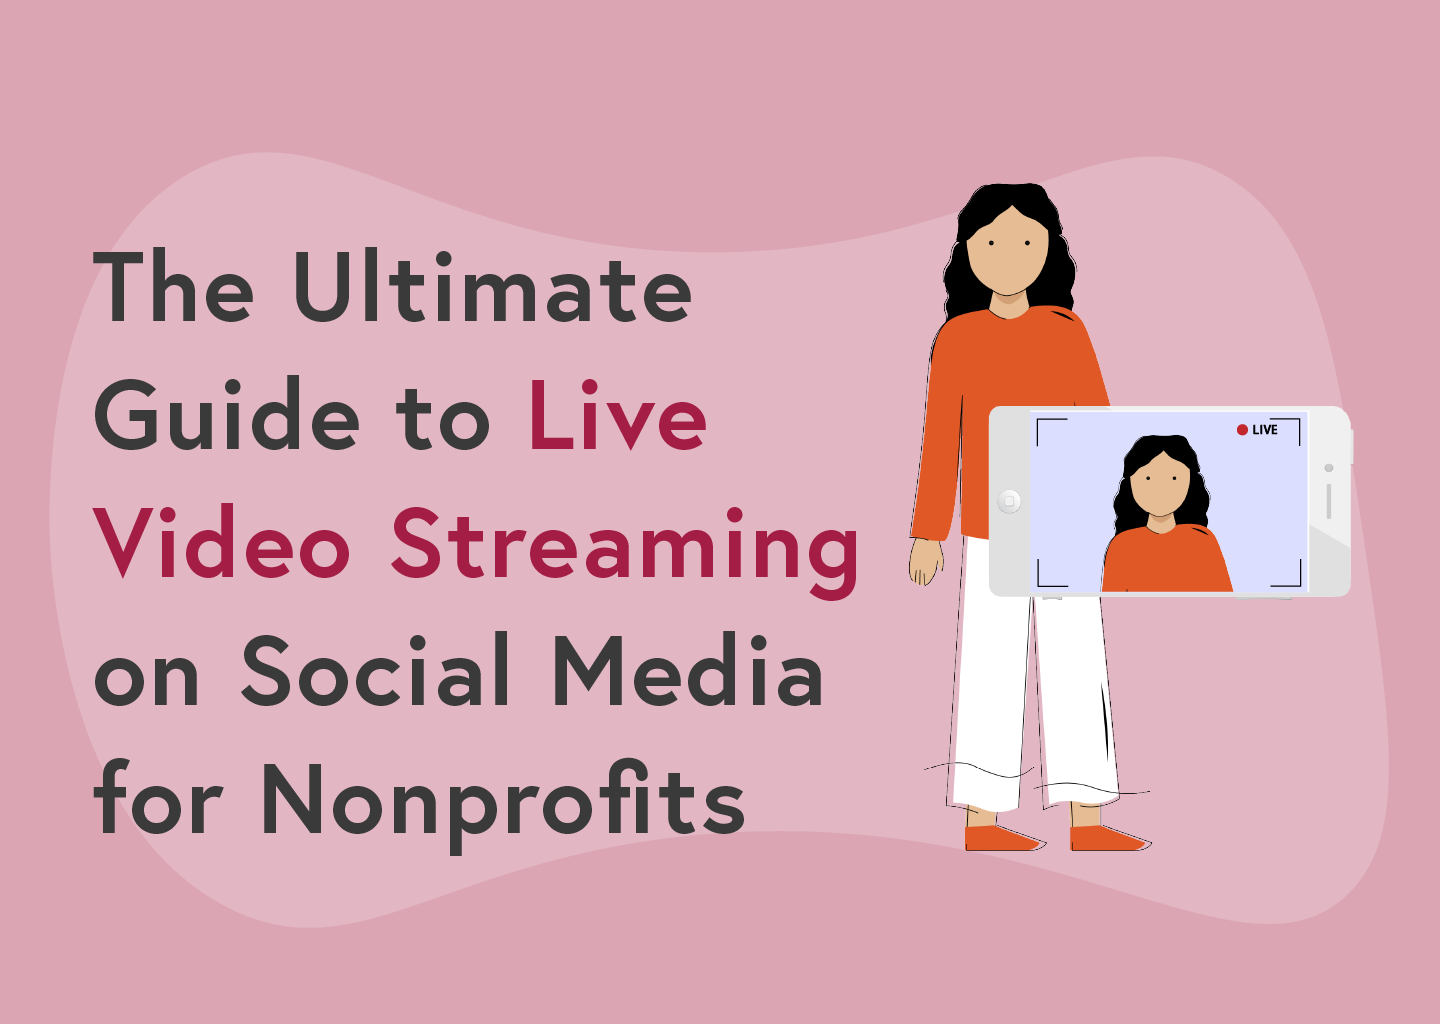 The Ultimate Guide to Live Video Streaming on Social Media for Nonprofits